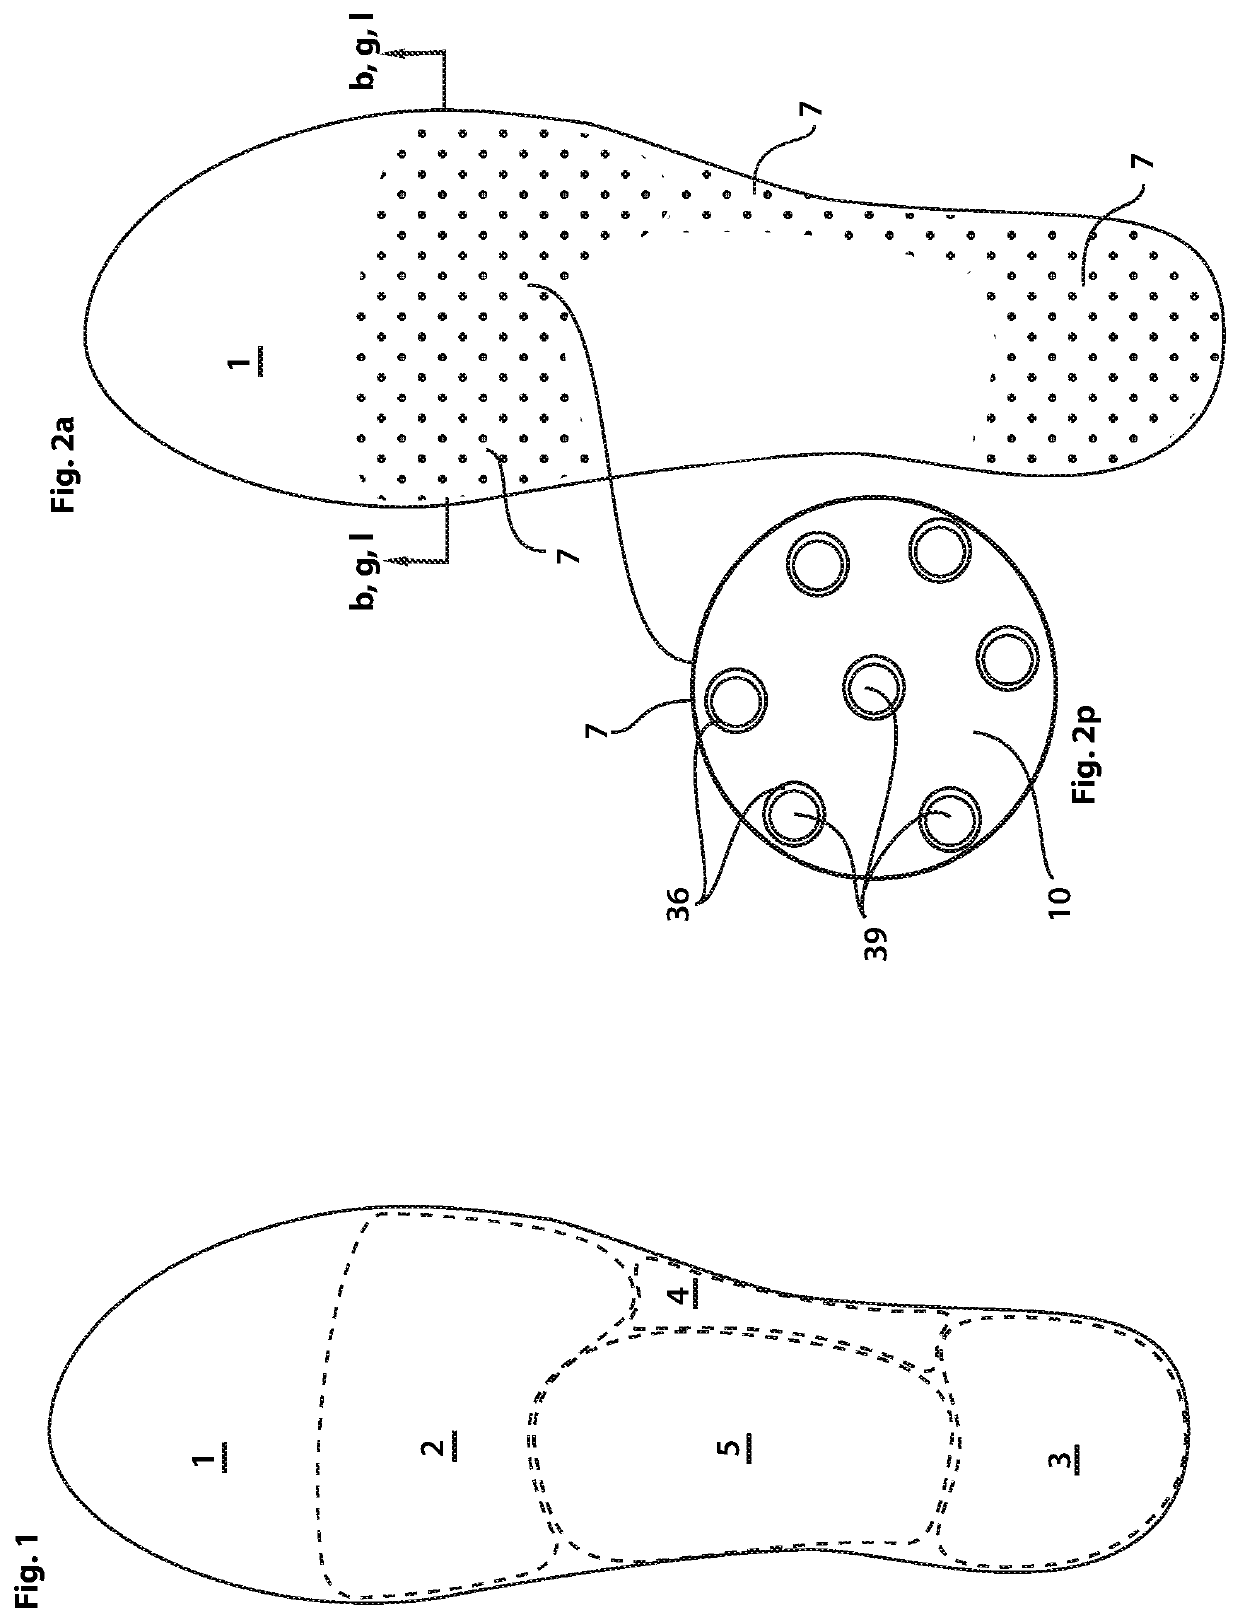 Random variable stimulus insoles and footwear to optimize human neuromuscular gait mechanics